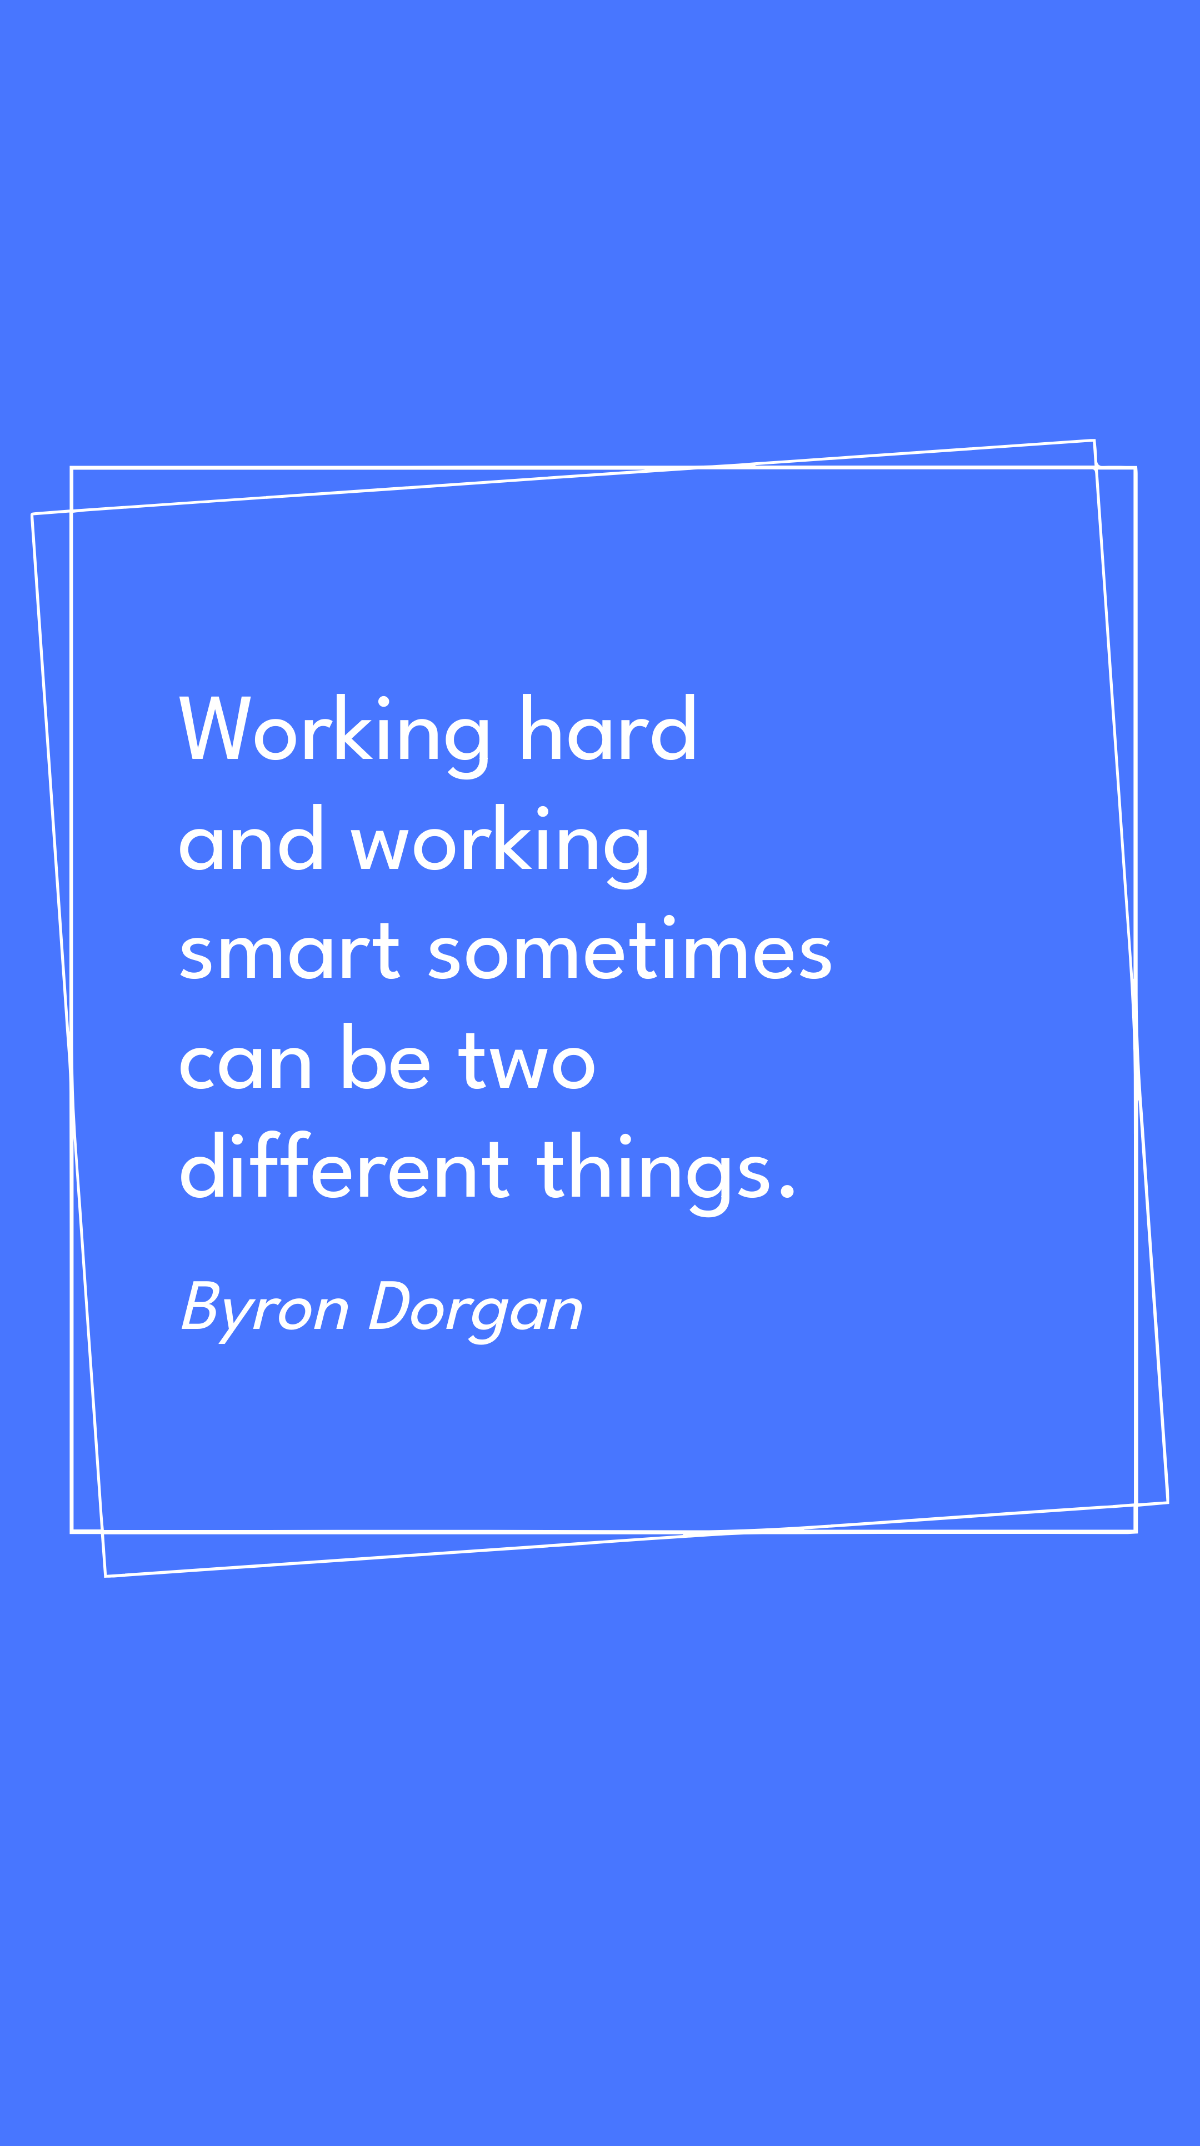 Free Byron Dorgan - Working hard and working smart sometimes can be two different things. Template